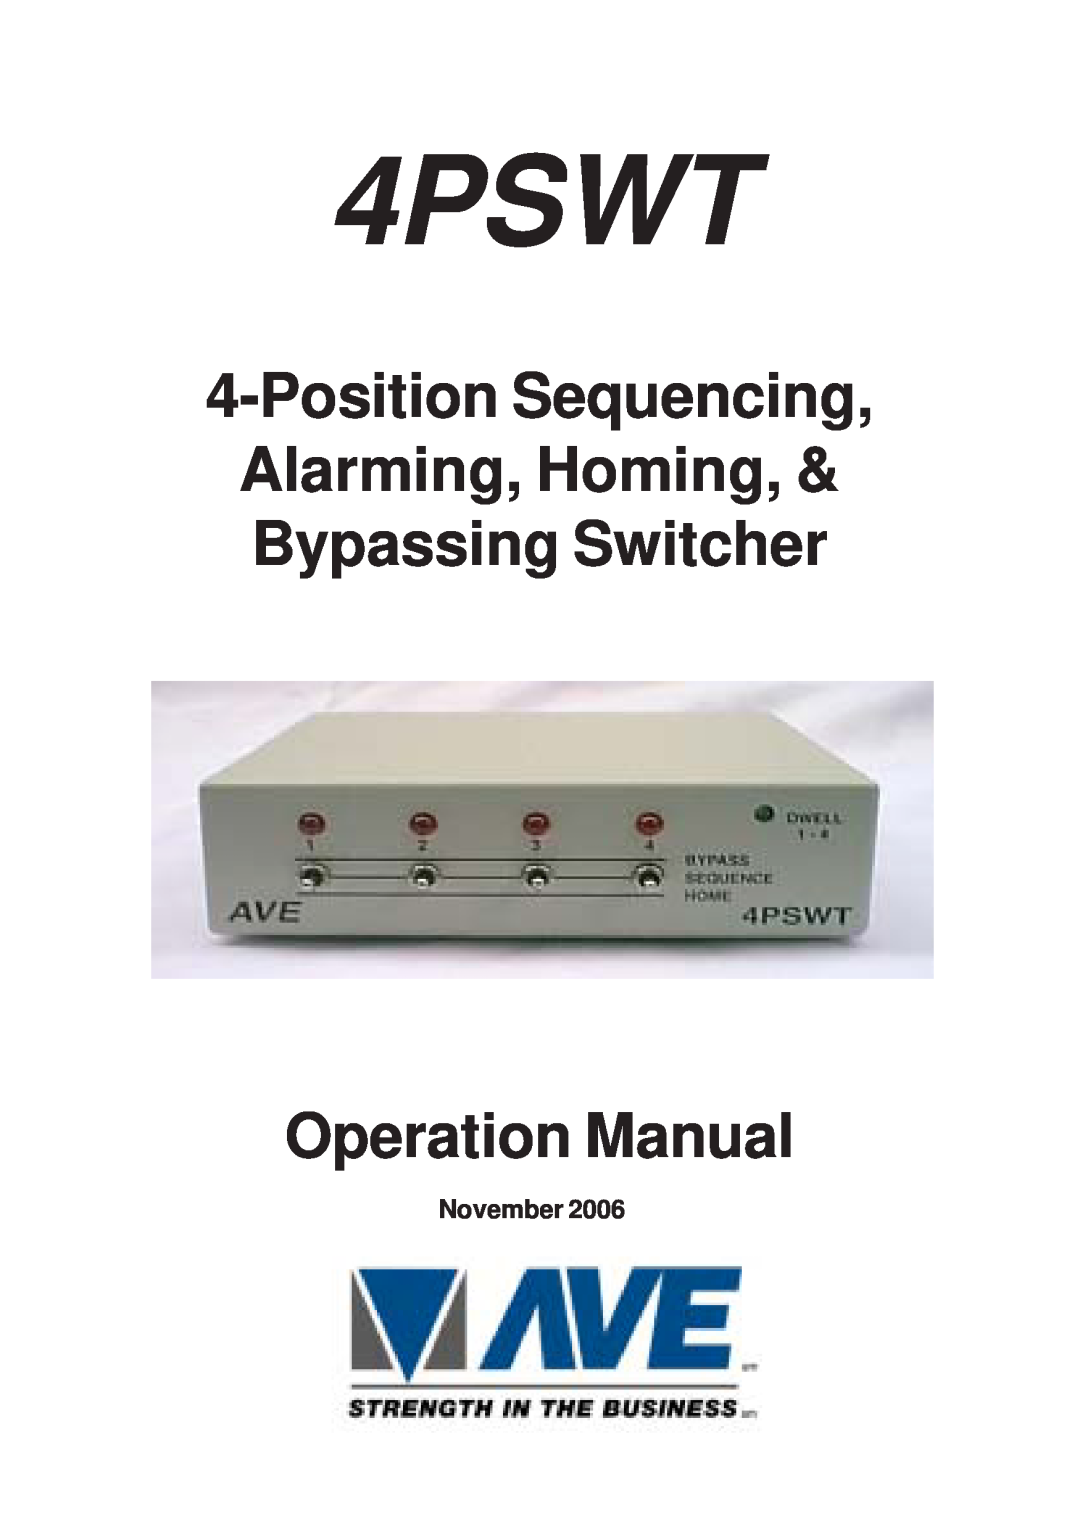 AVE 4PSWT operation manual November, Position Sequencing Alarming, Homing Bypassing Switcher, Operation Manual 